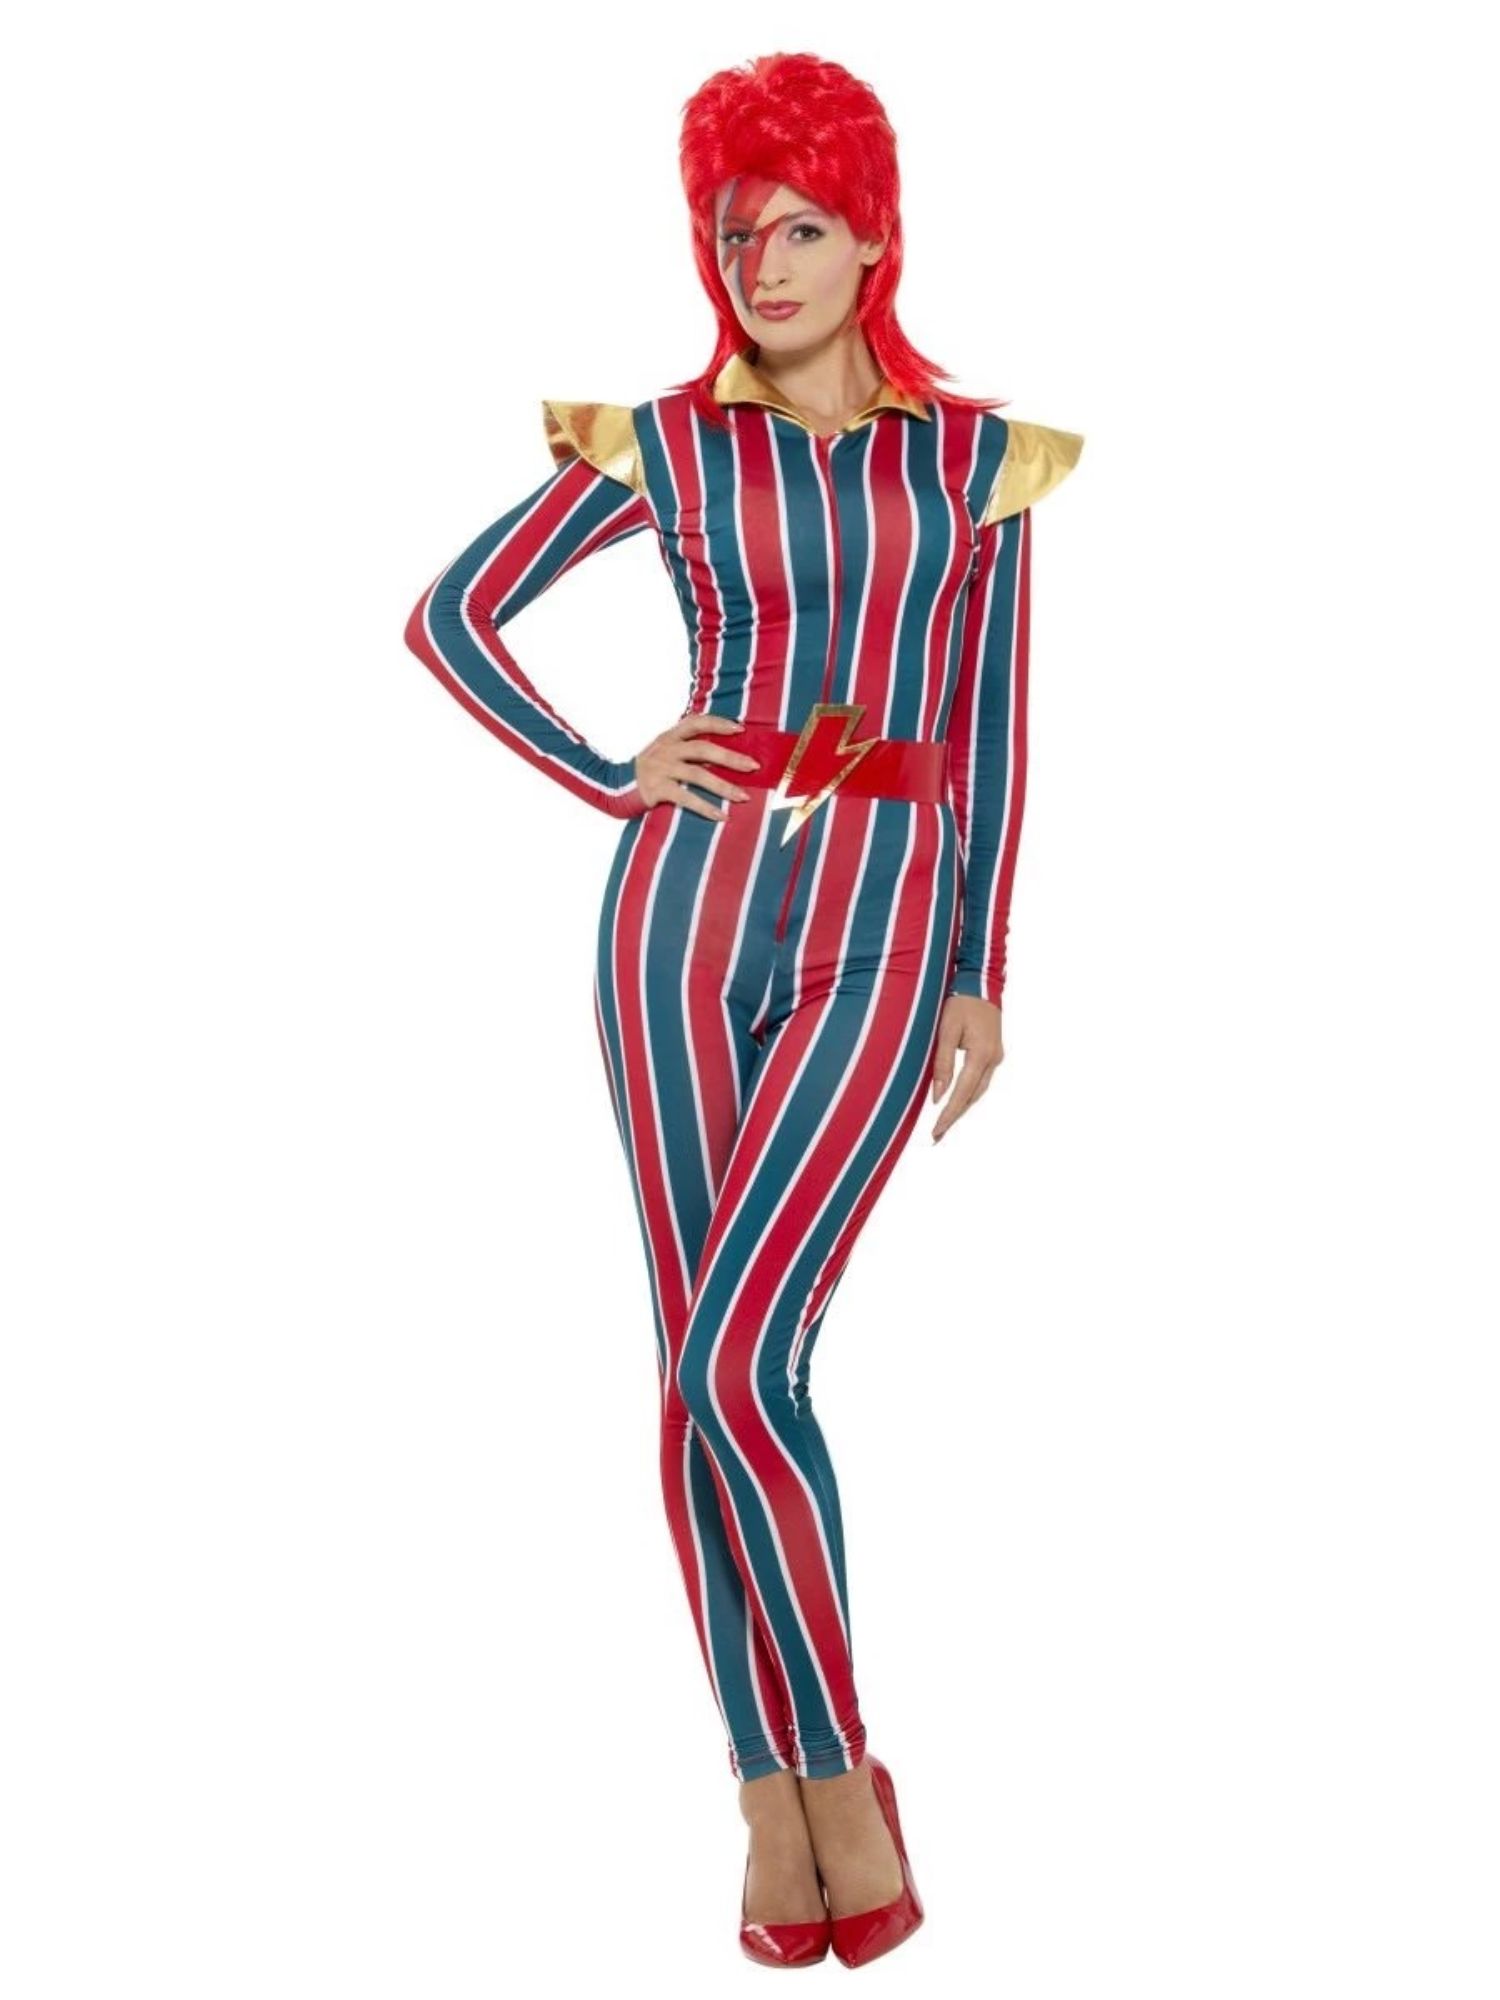 Smiffys Miss Space Superstar Women's Halloween Fancy-Dress Costume for Adult, L - image 2 of 2